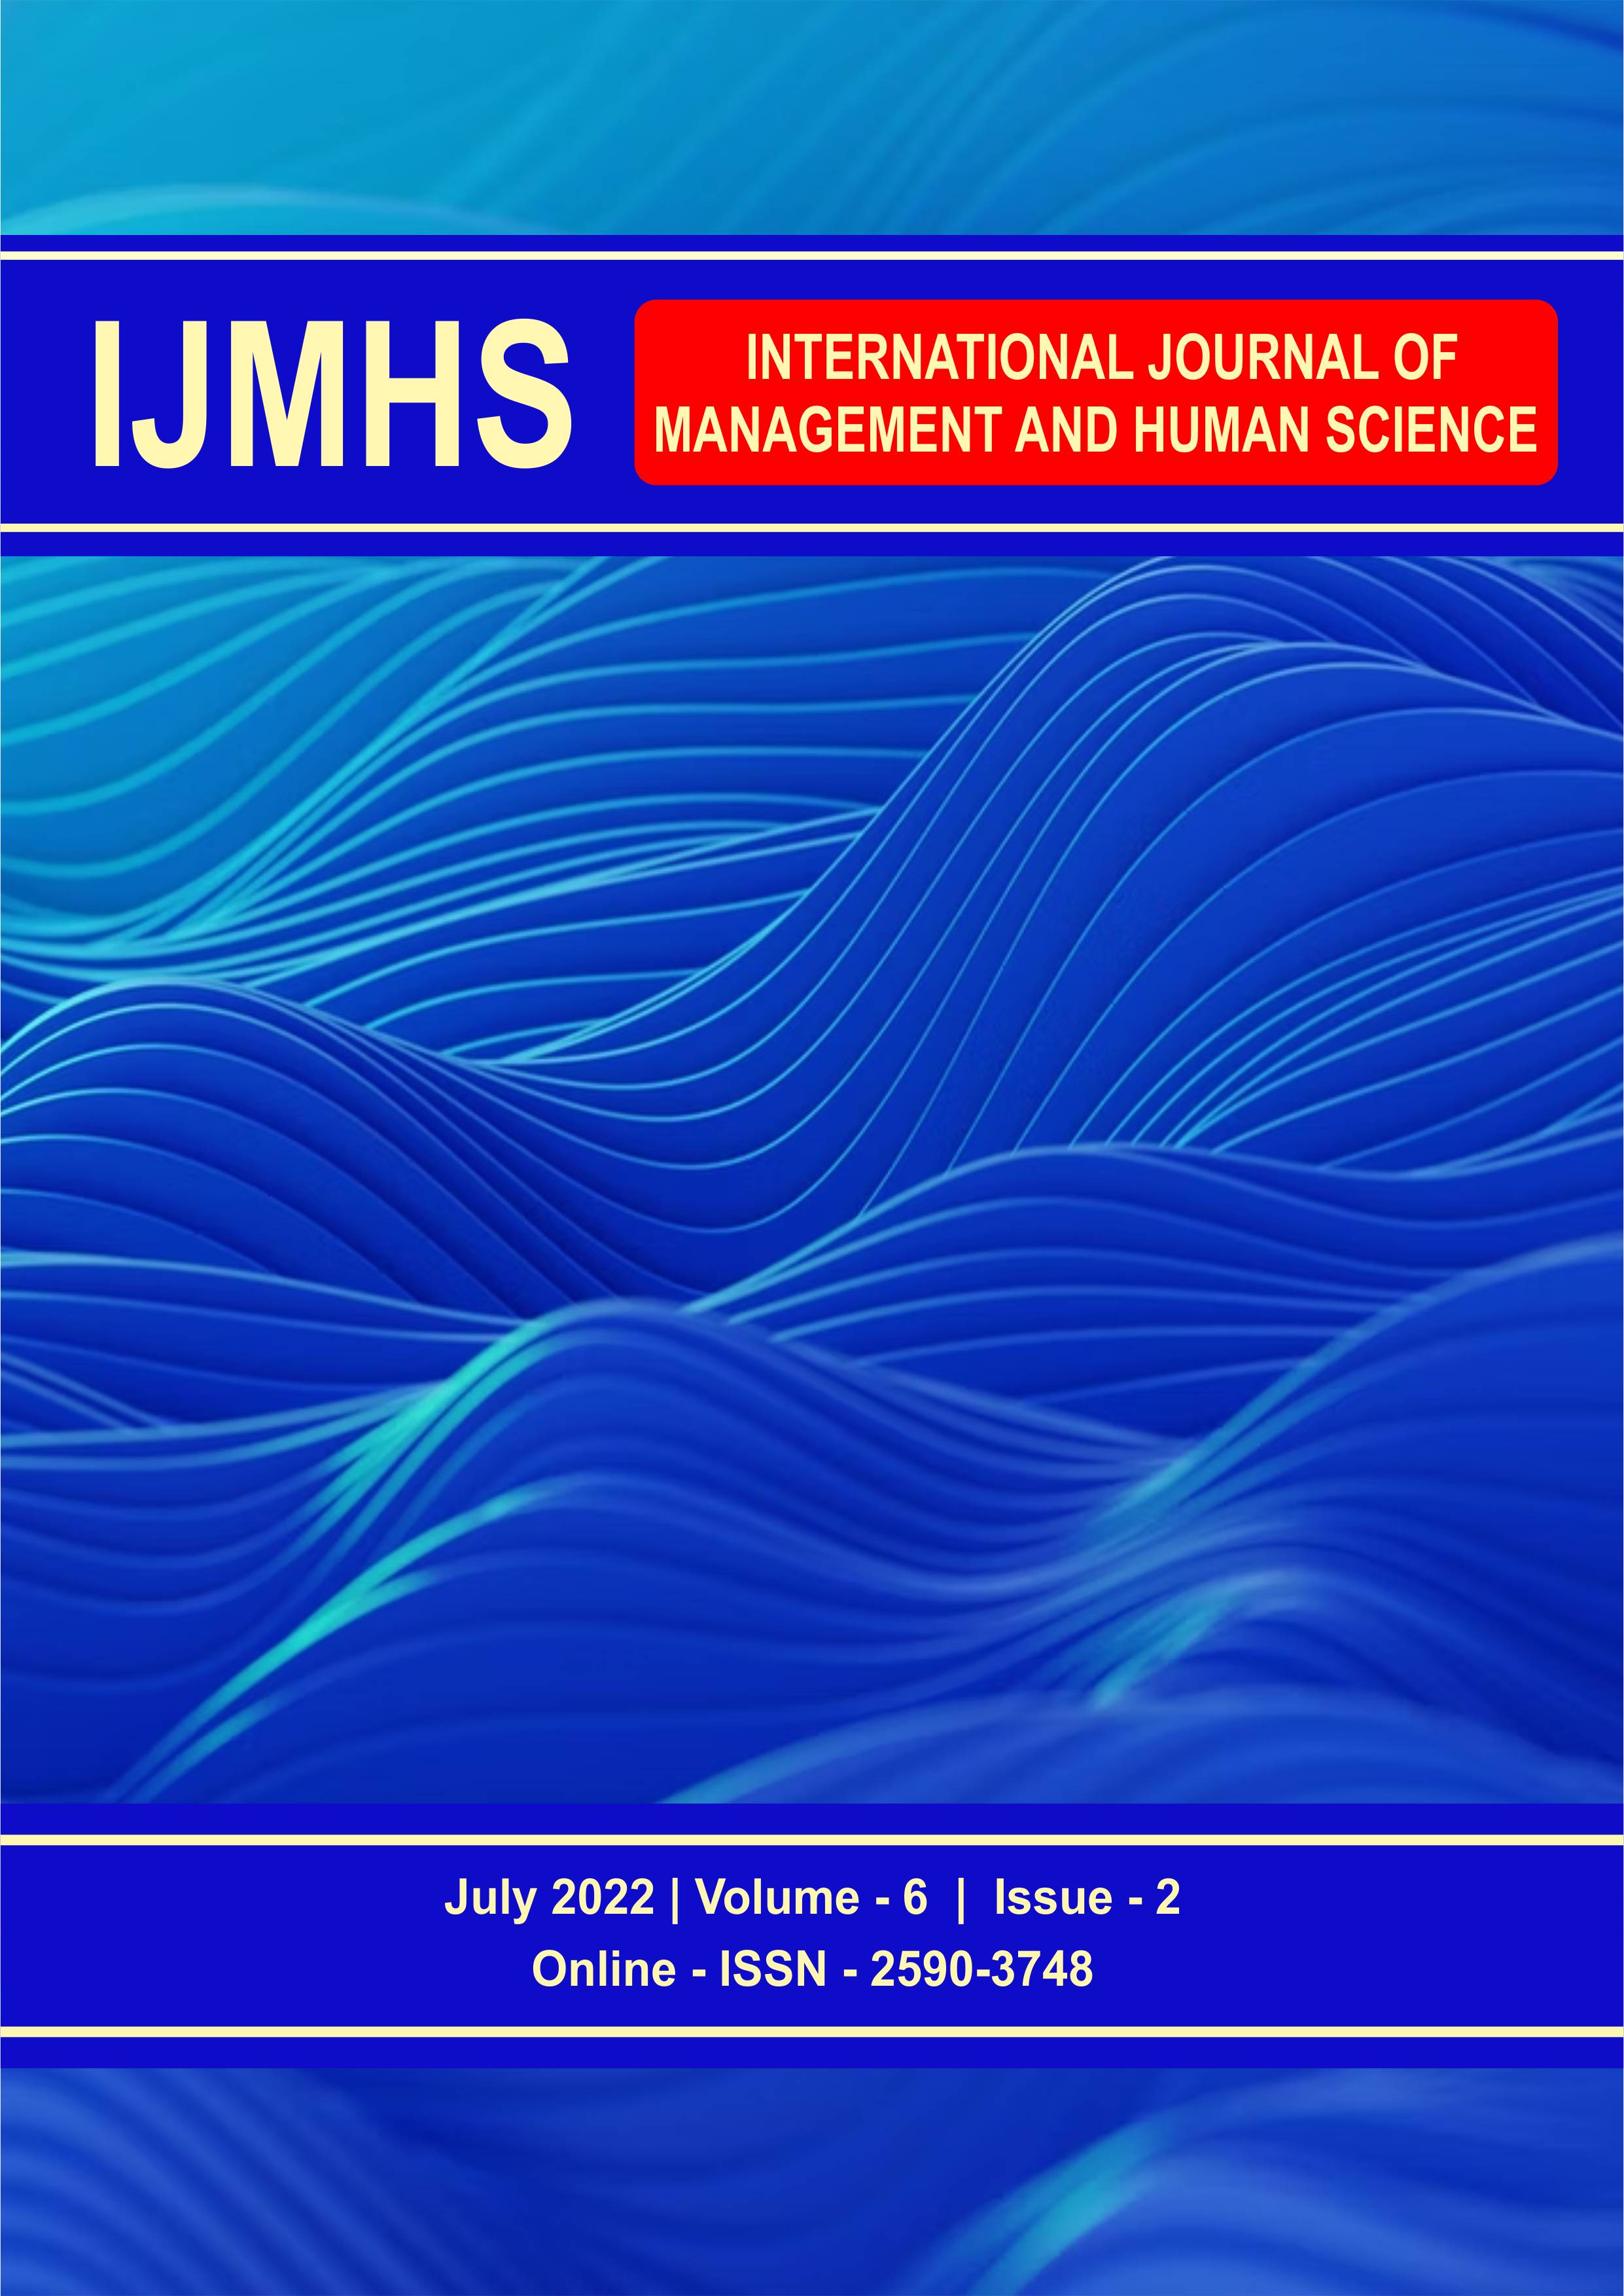 					View Vol. 6 No. 2 (2022): International Journal of Management and Human Science (IJMHS) 
				